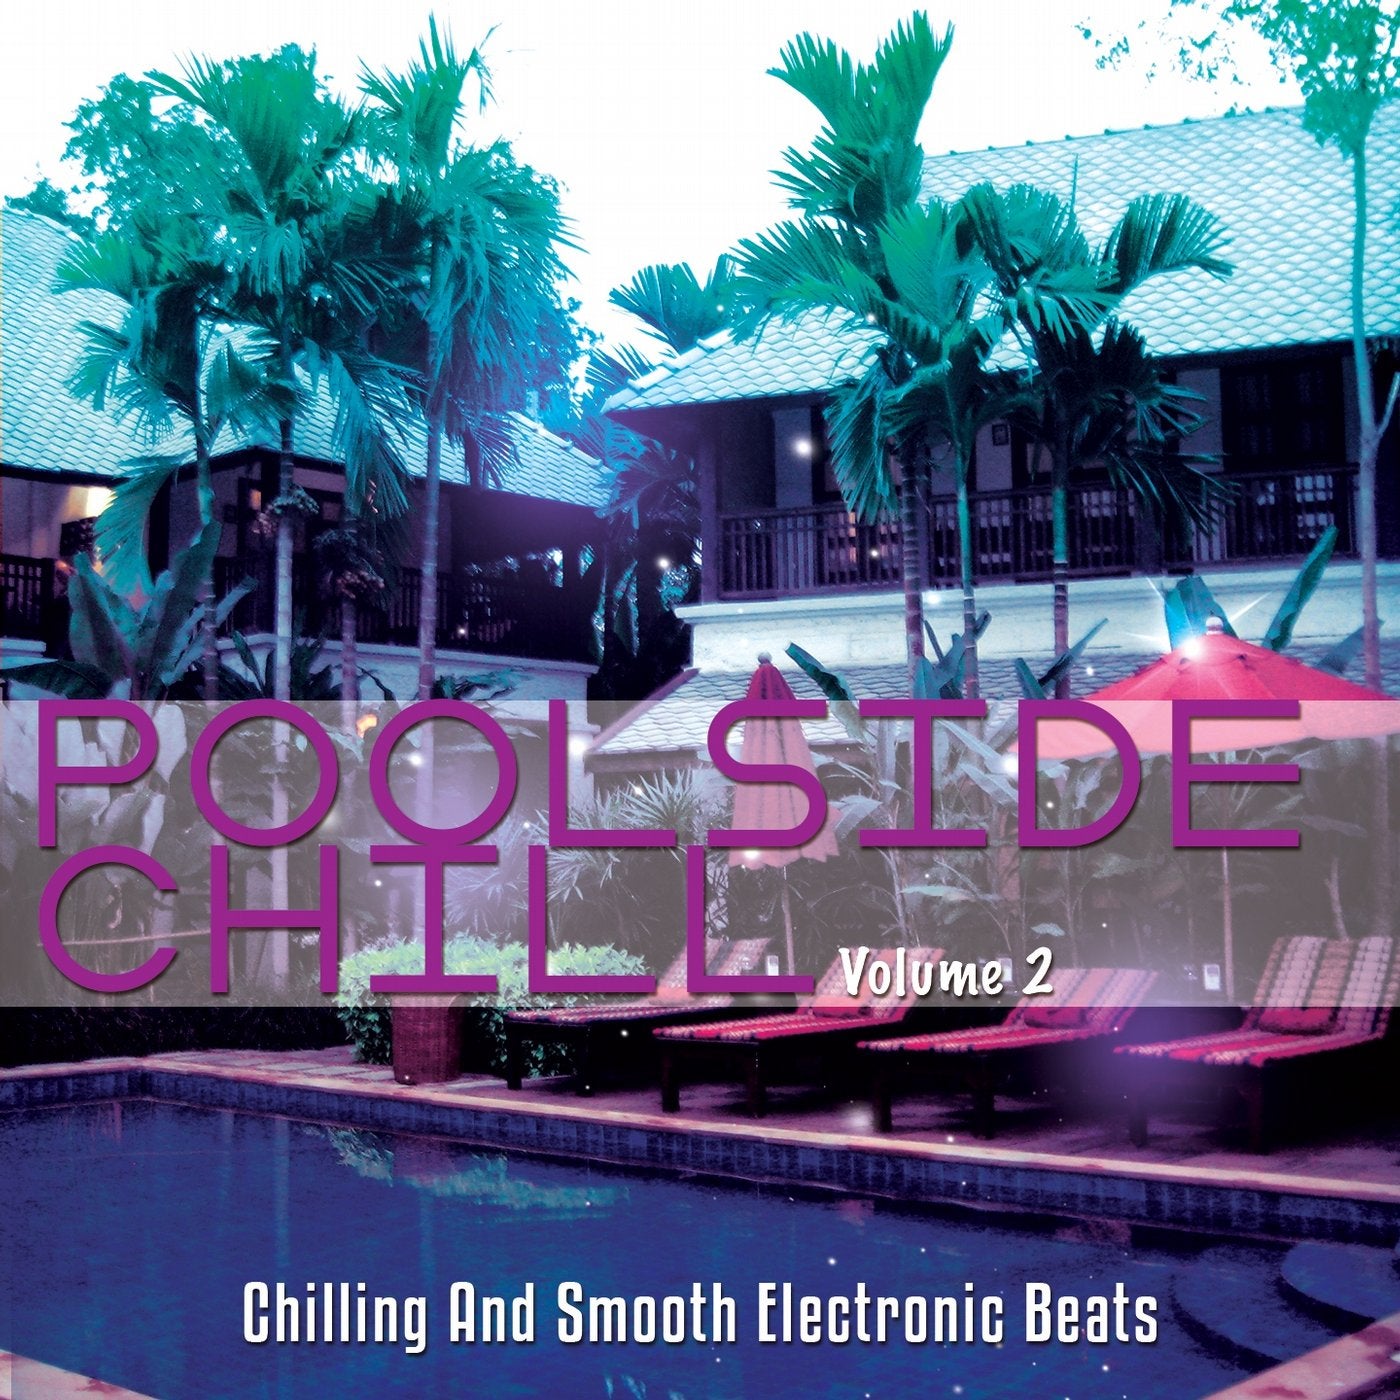 Poolside Chill, Vol. 2 (Chilling and Smooth Electronic Beats)